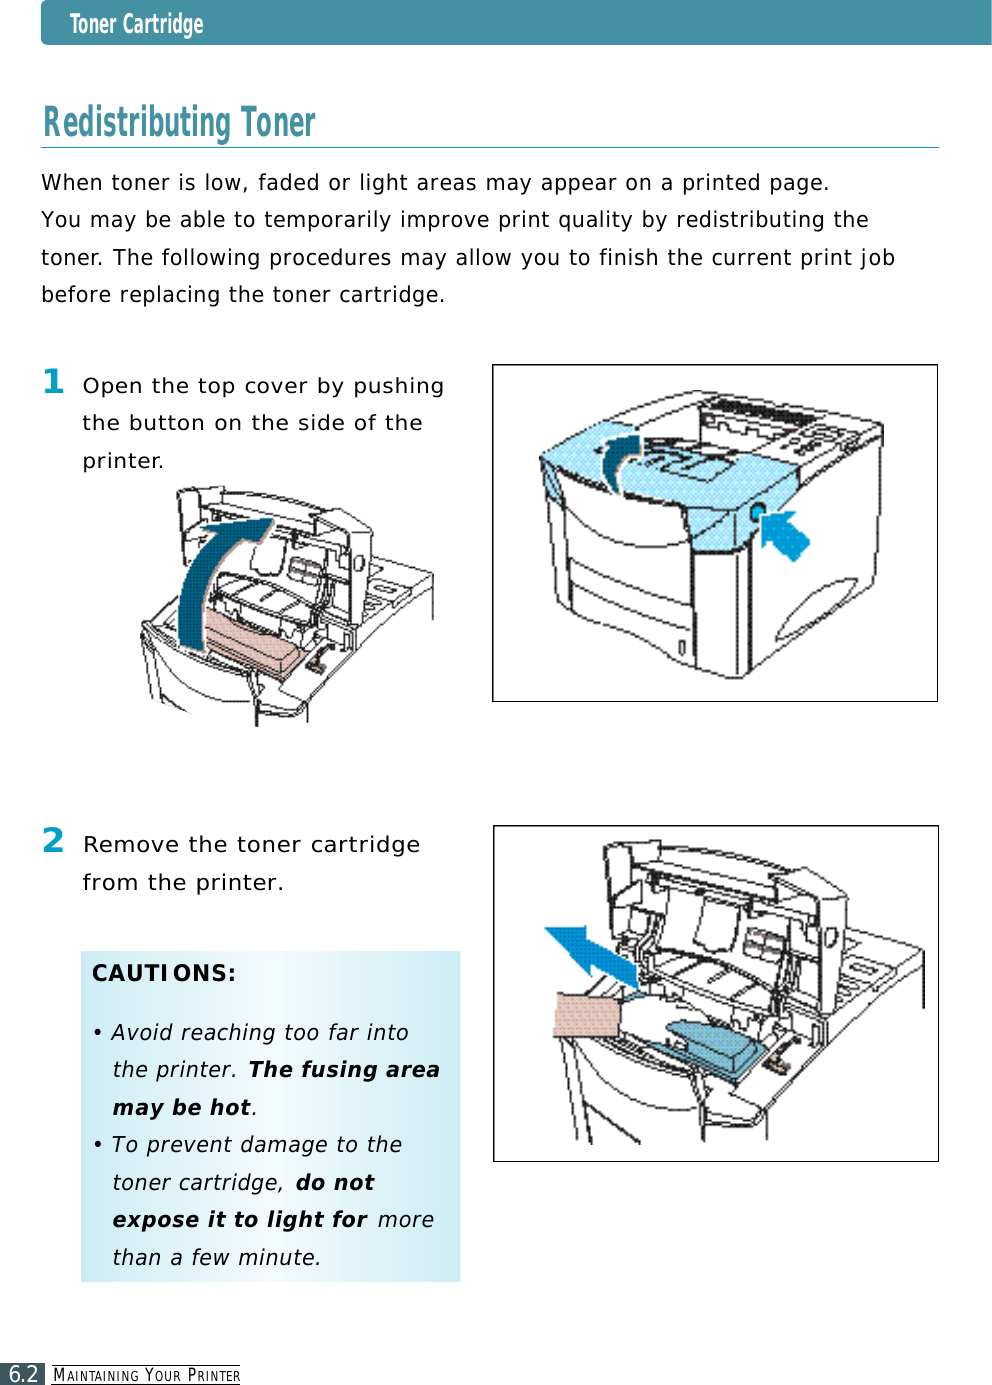 MA I N TA I N I N G YO U R PR I N T E R6.2Toner CartridgeWhen toner is low, faded or light areas may appear on a printed page. You may be able to temporarily improve print quality by redistributing thet o n e r. The following procedures may allow you to finish the current print jobbefore replacing the toner cartridge.Redistributing Toner1Open the top cover by pushingthe button on the side of thep r i n t e r.2Re m ove the toner cartridgefrom the printer.C A U T I O N S :• Avoid reaching too far intothe printer. The fusing areamay be hot.• To prevent damage to thetoner cartridge, do notexpose it to light for m o r ethan a few minute.